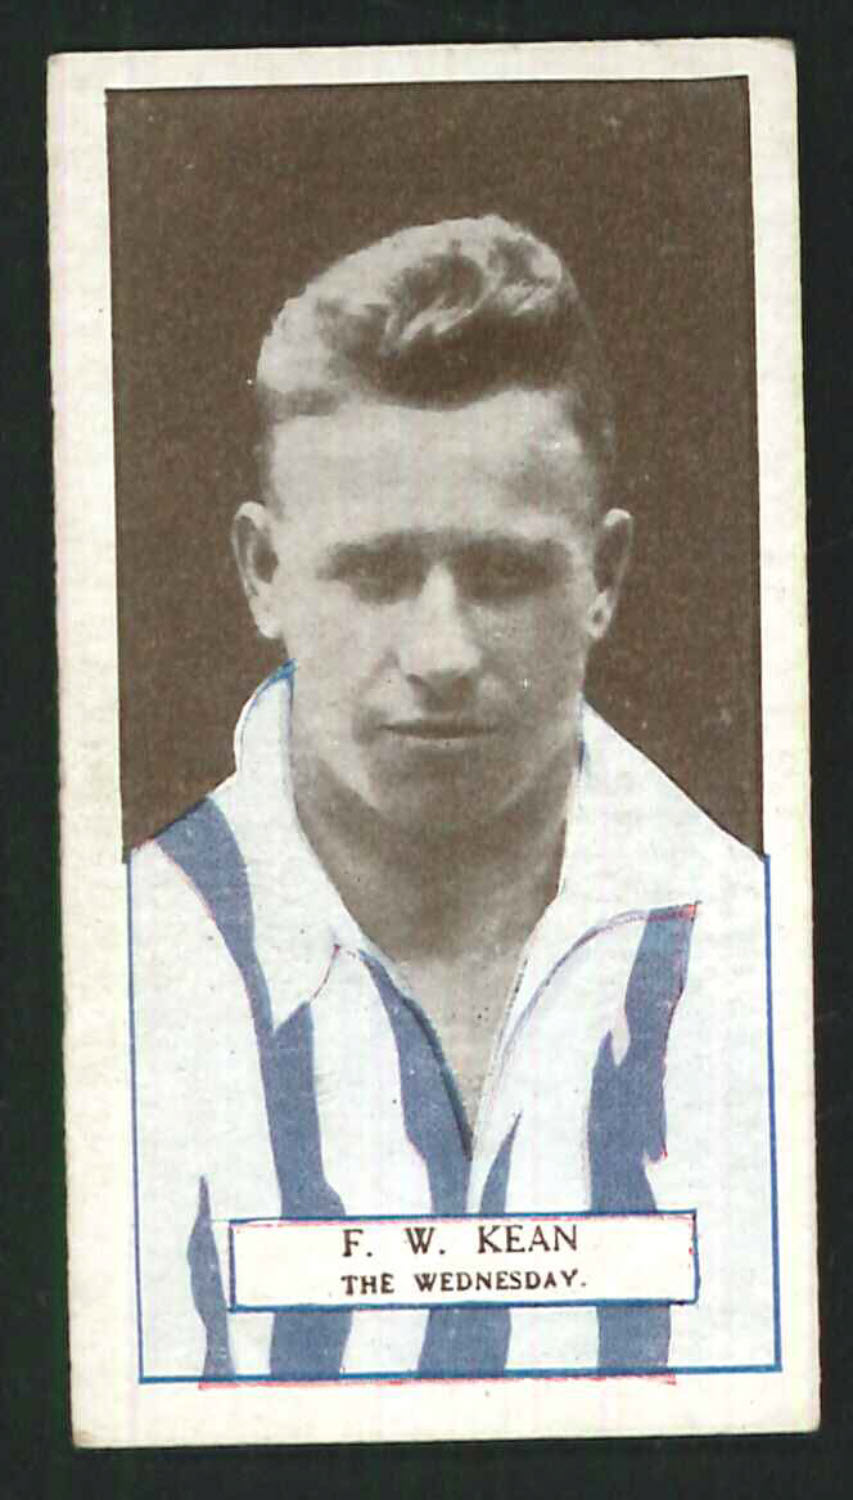 Pattreiouex Footballers Series No 98 F W Kean The Wednesday "Sheffield" - Click Image to Close